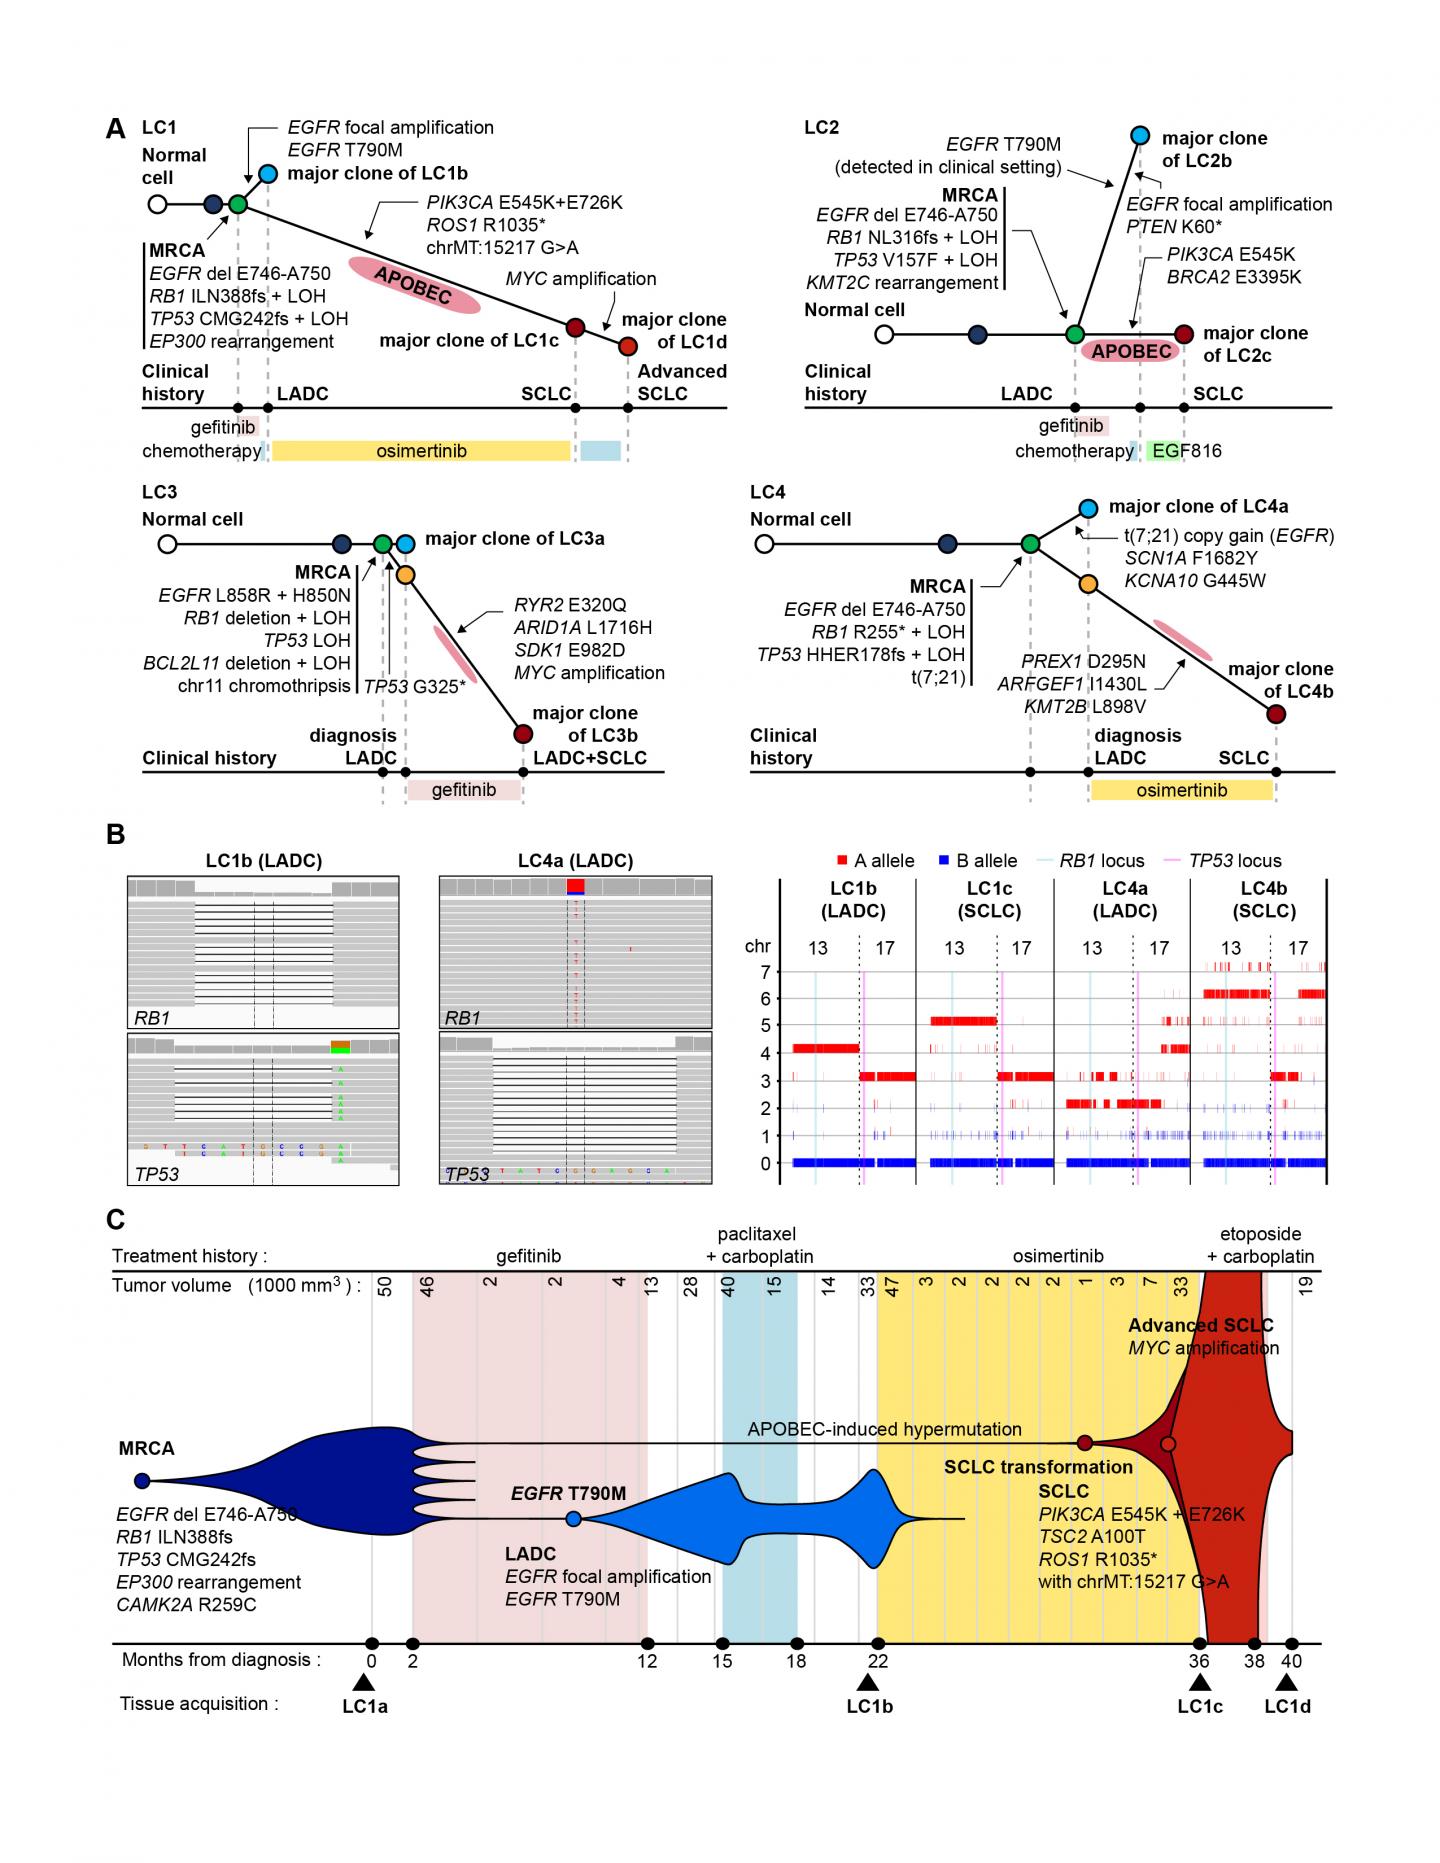 Figure: Phylogeny Analysis of Serially-Acquired Tumors